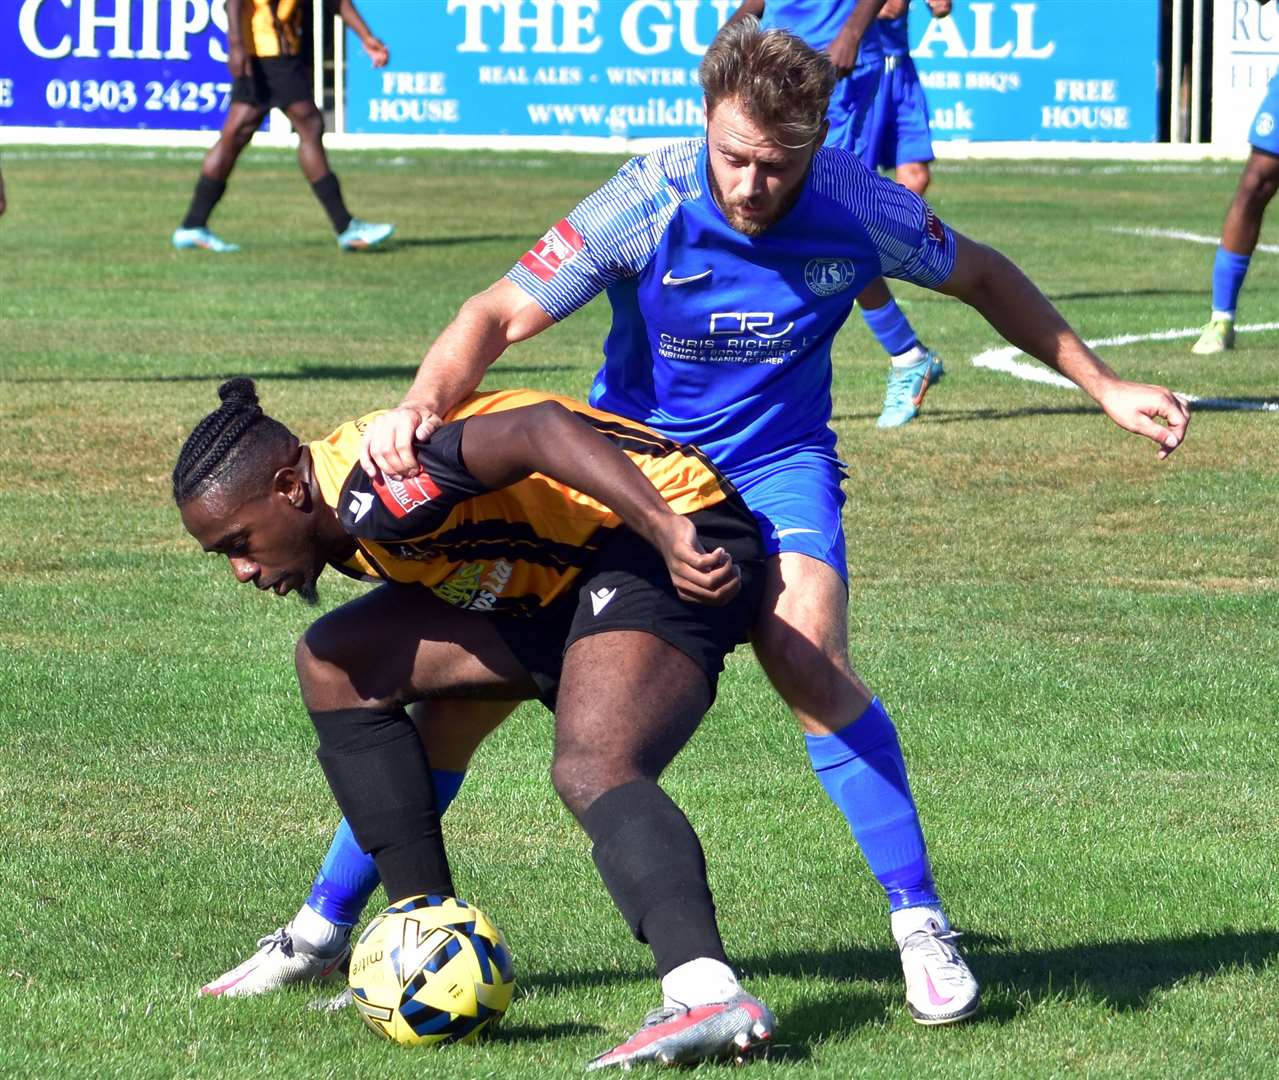 Jack Parter netted Herne Bay's opener in their win against Lewes. Picture: Randolph File